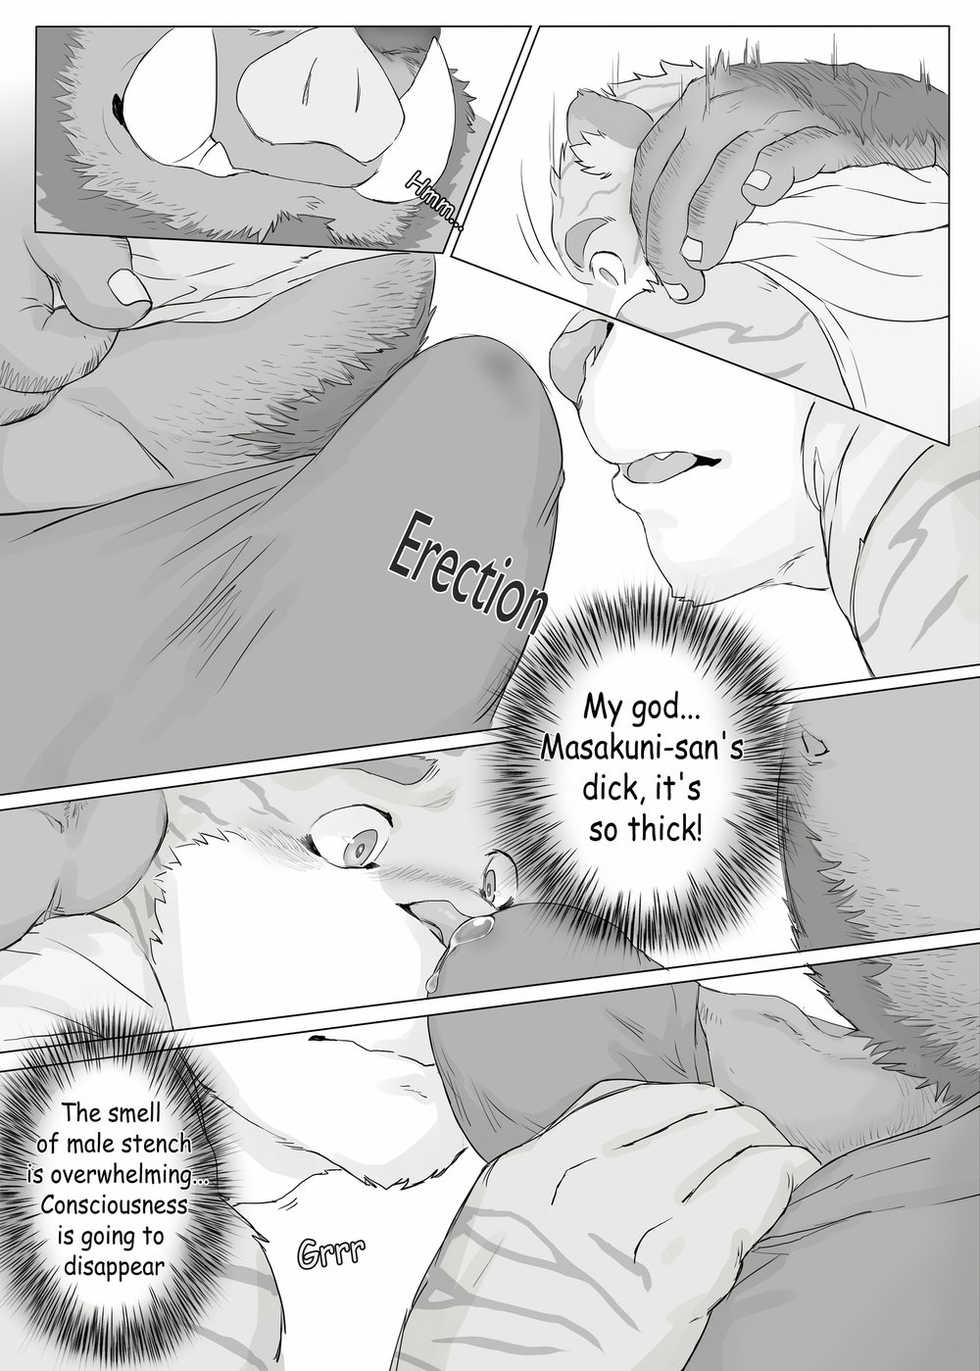 [Renoky] Encounter on Construction site [English] [Digital] - Page 15